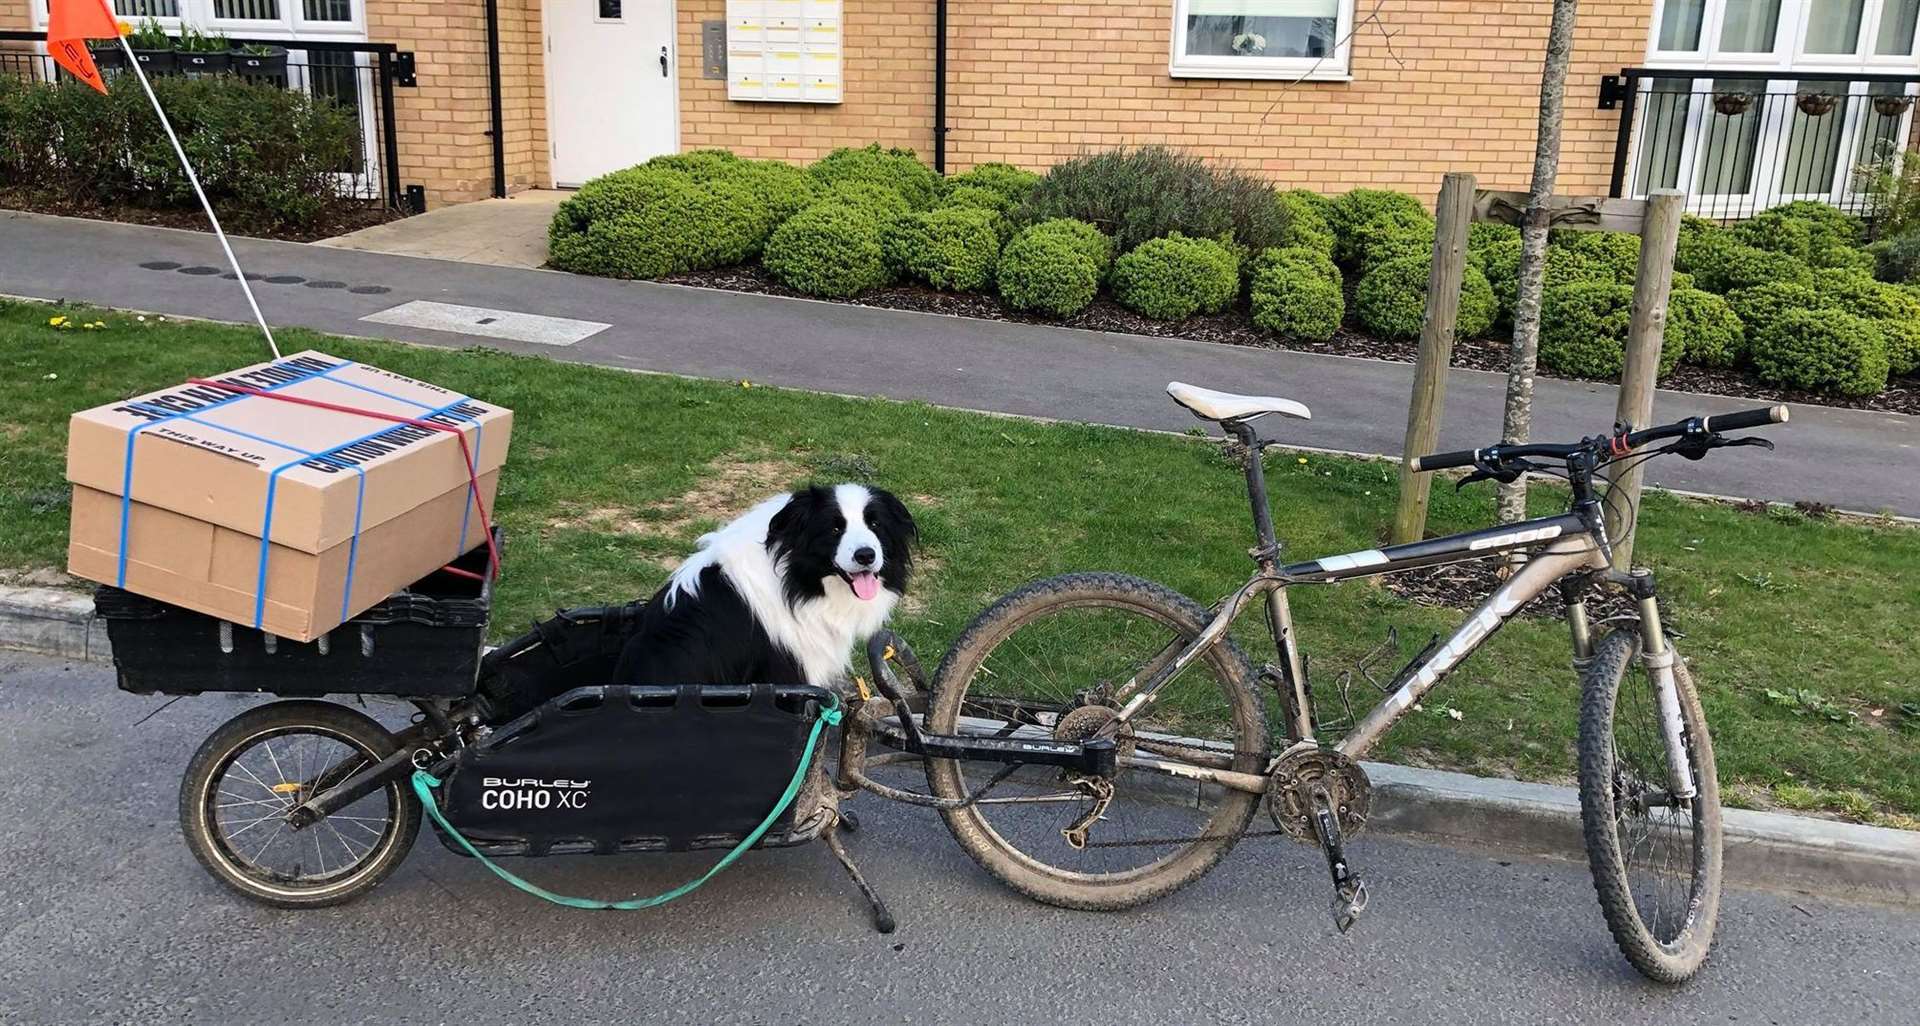 Duncan's Border Collie Benji is a big fan of the trailer